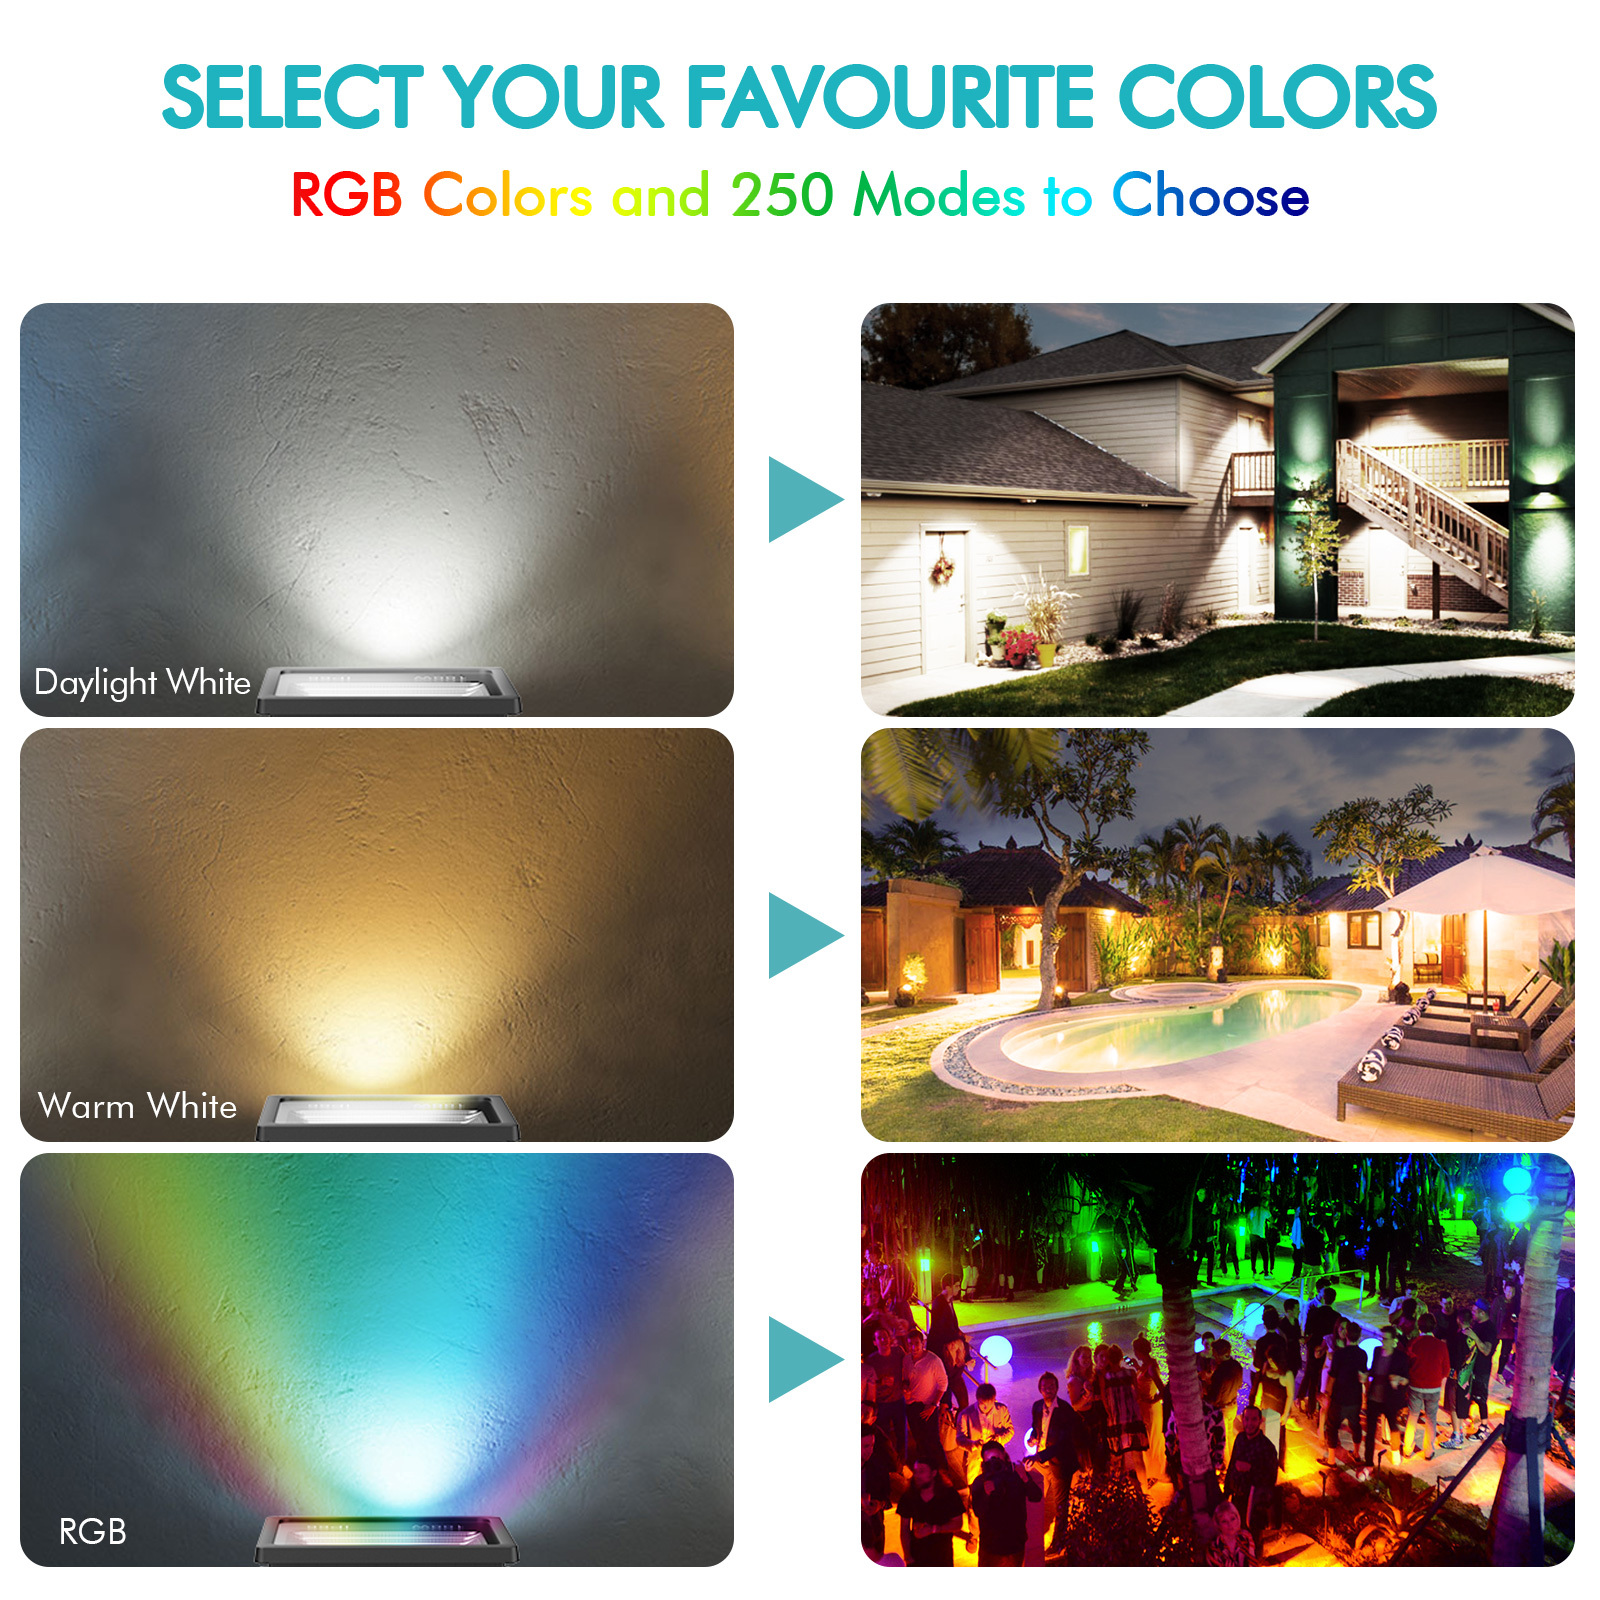 25W RGB Floodlight Outdoor or Indoor,Bluetooth Smart Colour Changing LED Flood Light APP Control,Waterproof Stage Landscape with Dimmable,Timing,Grouping Control,Music Sync